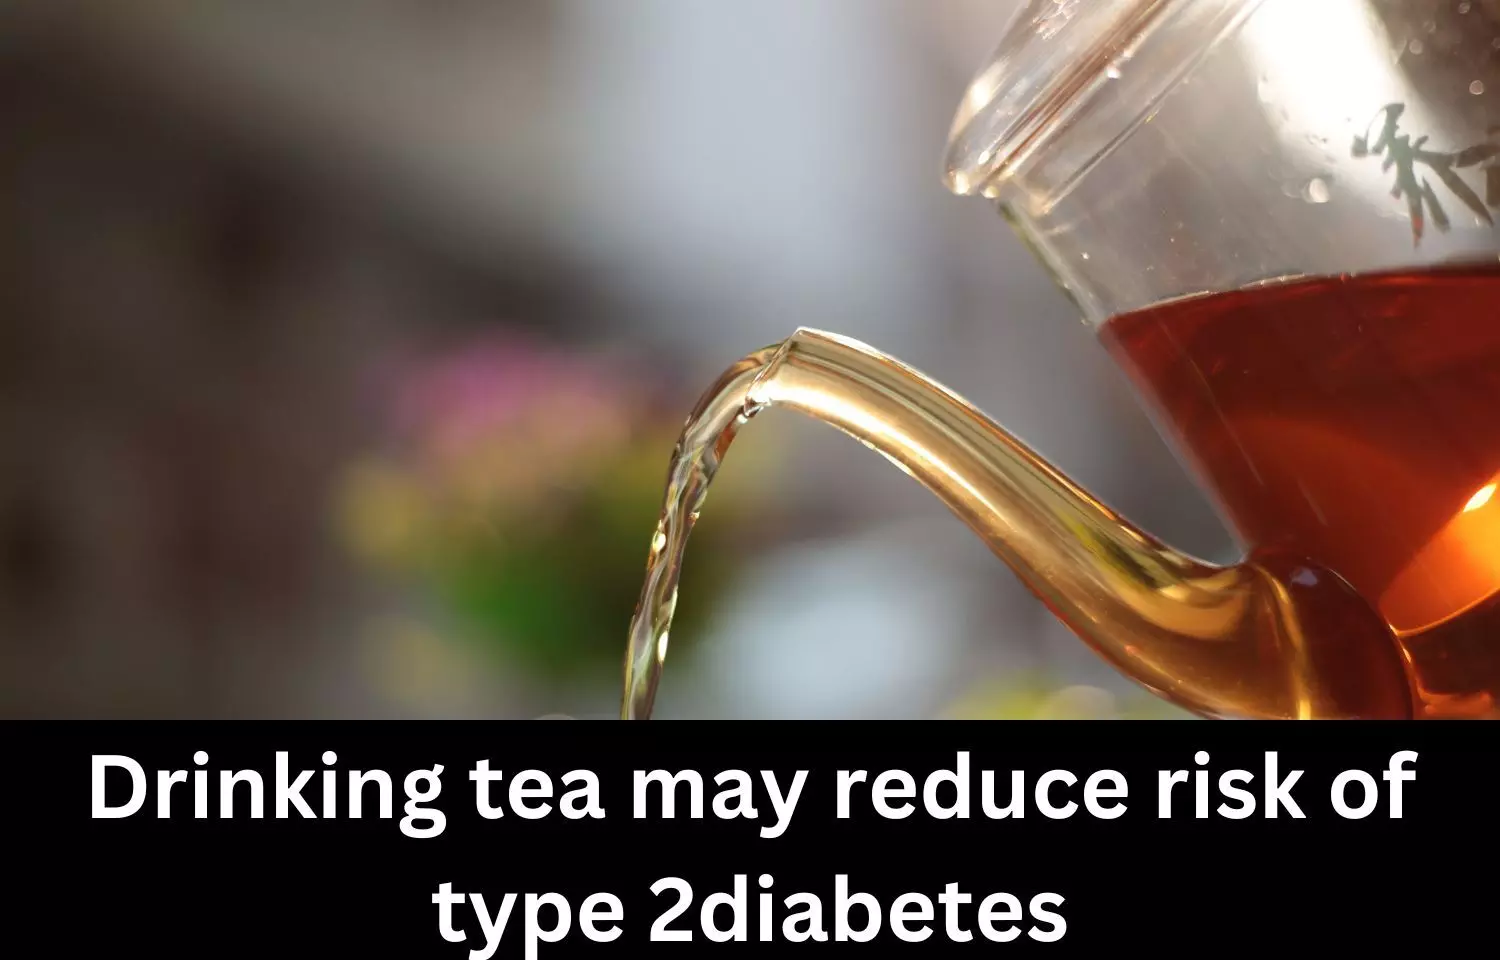 Drinking tea may reduce risk of type 2 diabetes: Study